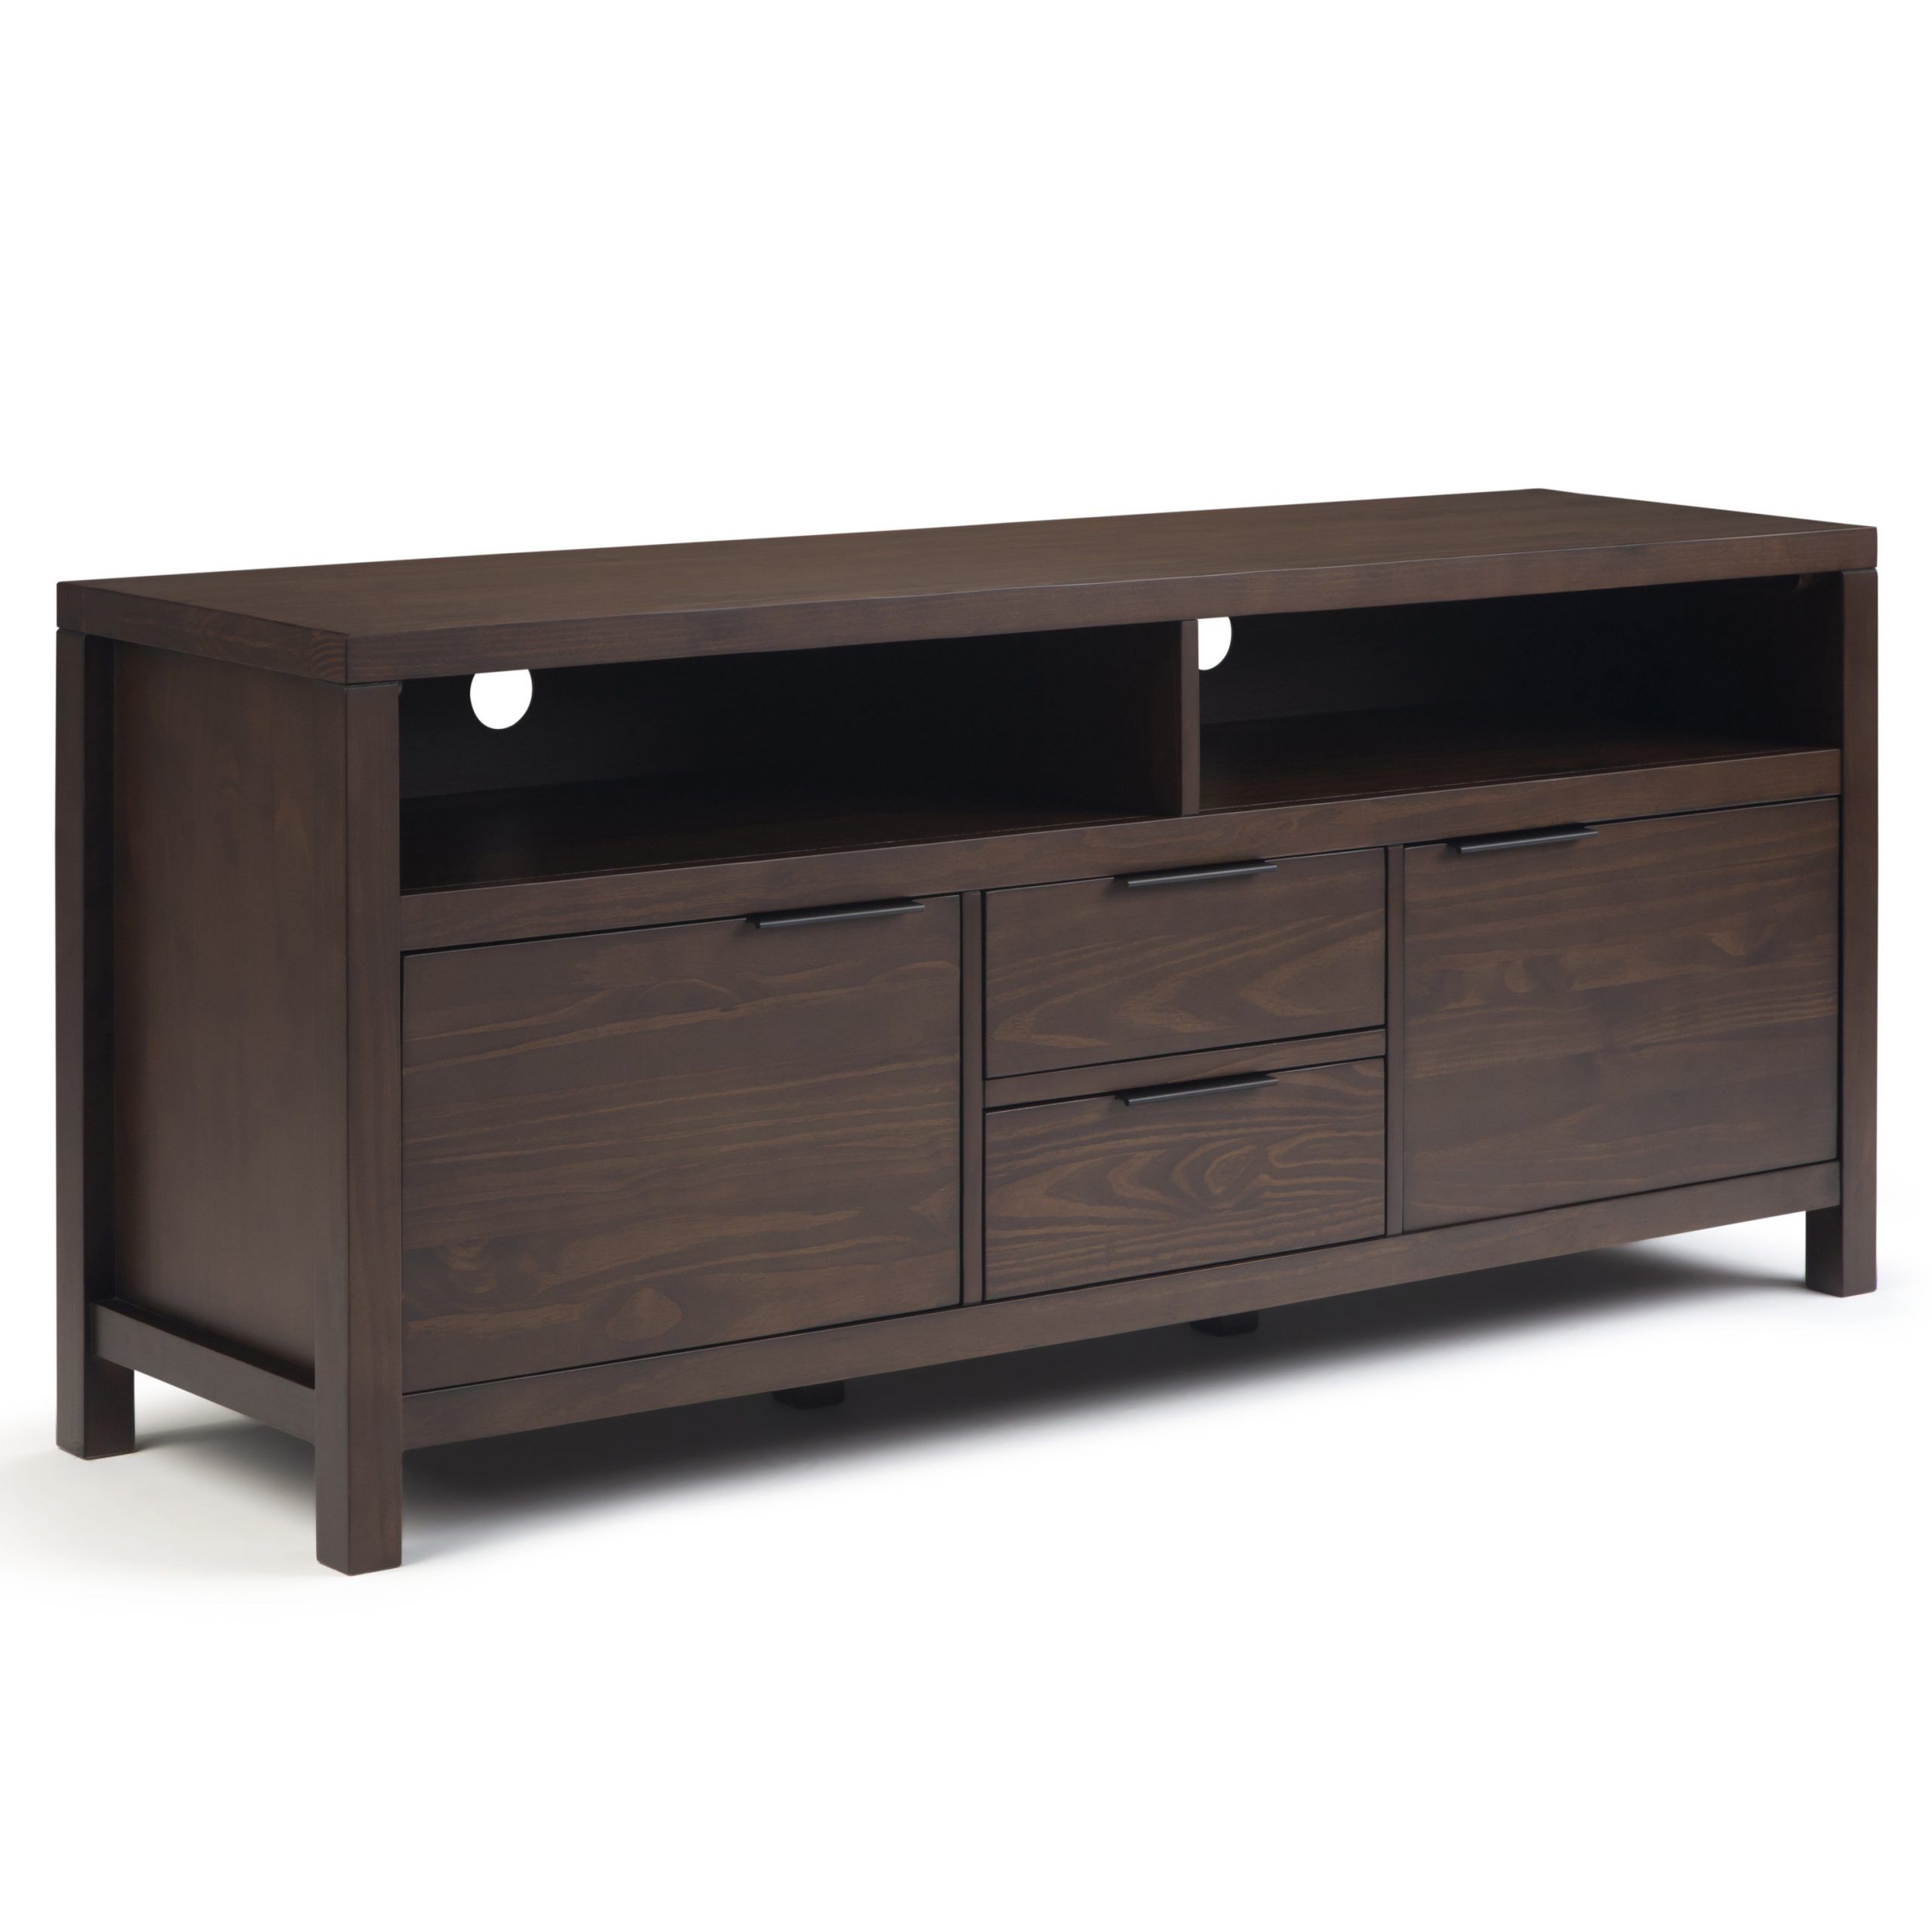 Solid Wood Tv Stands For Tvs Up To 65" Inside Favorite Brooklyn + Max Auster Solid Wood 60 Inch Wide Contemporary (View 13 of 25)